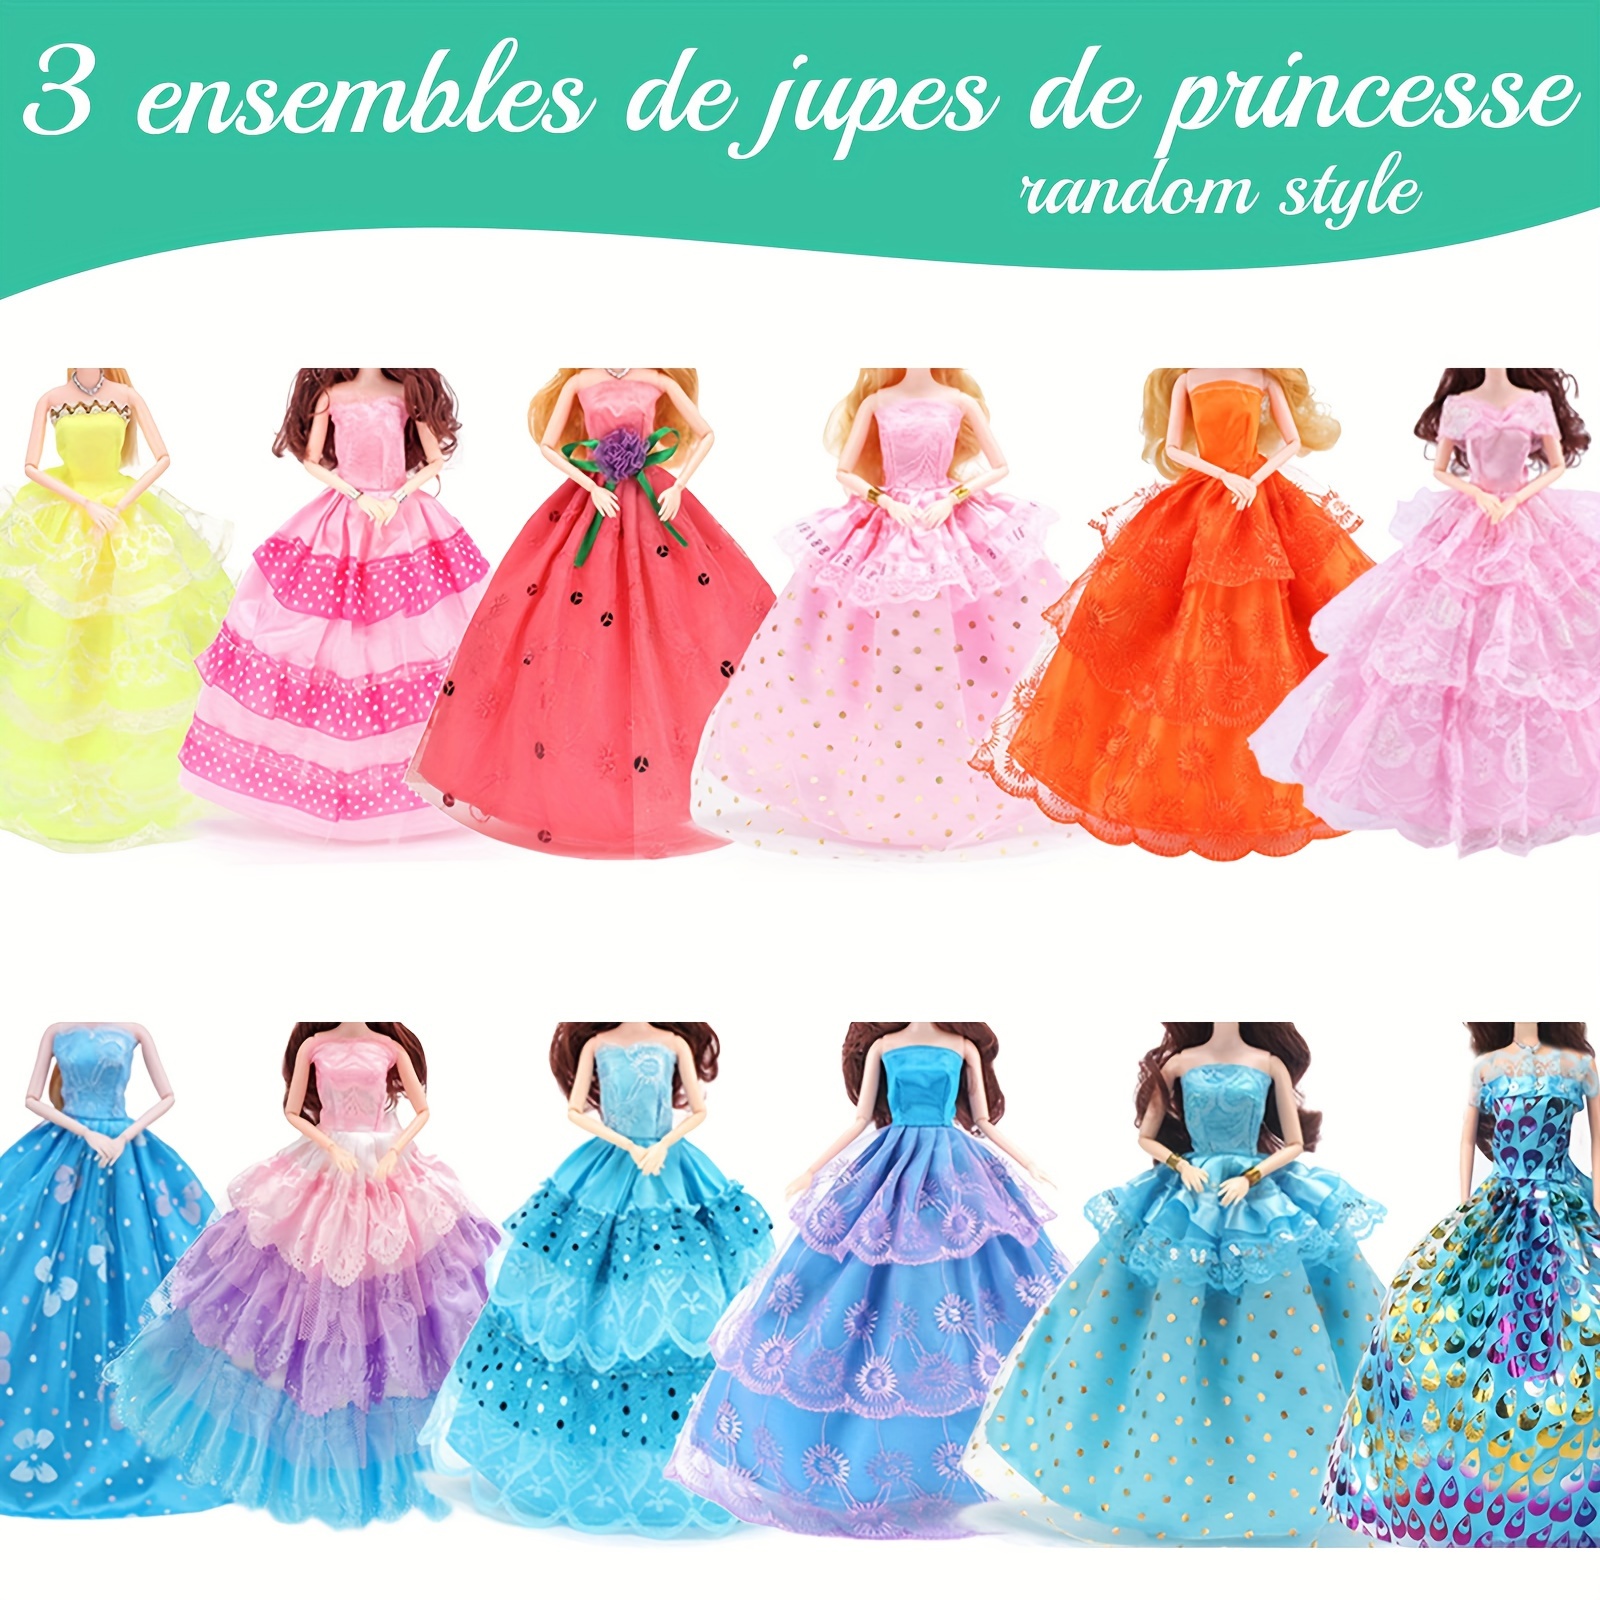 50 Pcs Doll Clothes Outfit for 11.5 Inch Doll, Doll Accessories Collection  with 3 Princess Dresses+10 Dressest+6 Tops+6 Pants+5 Bikinis+5